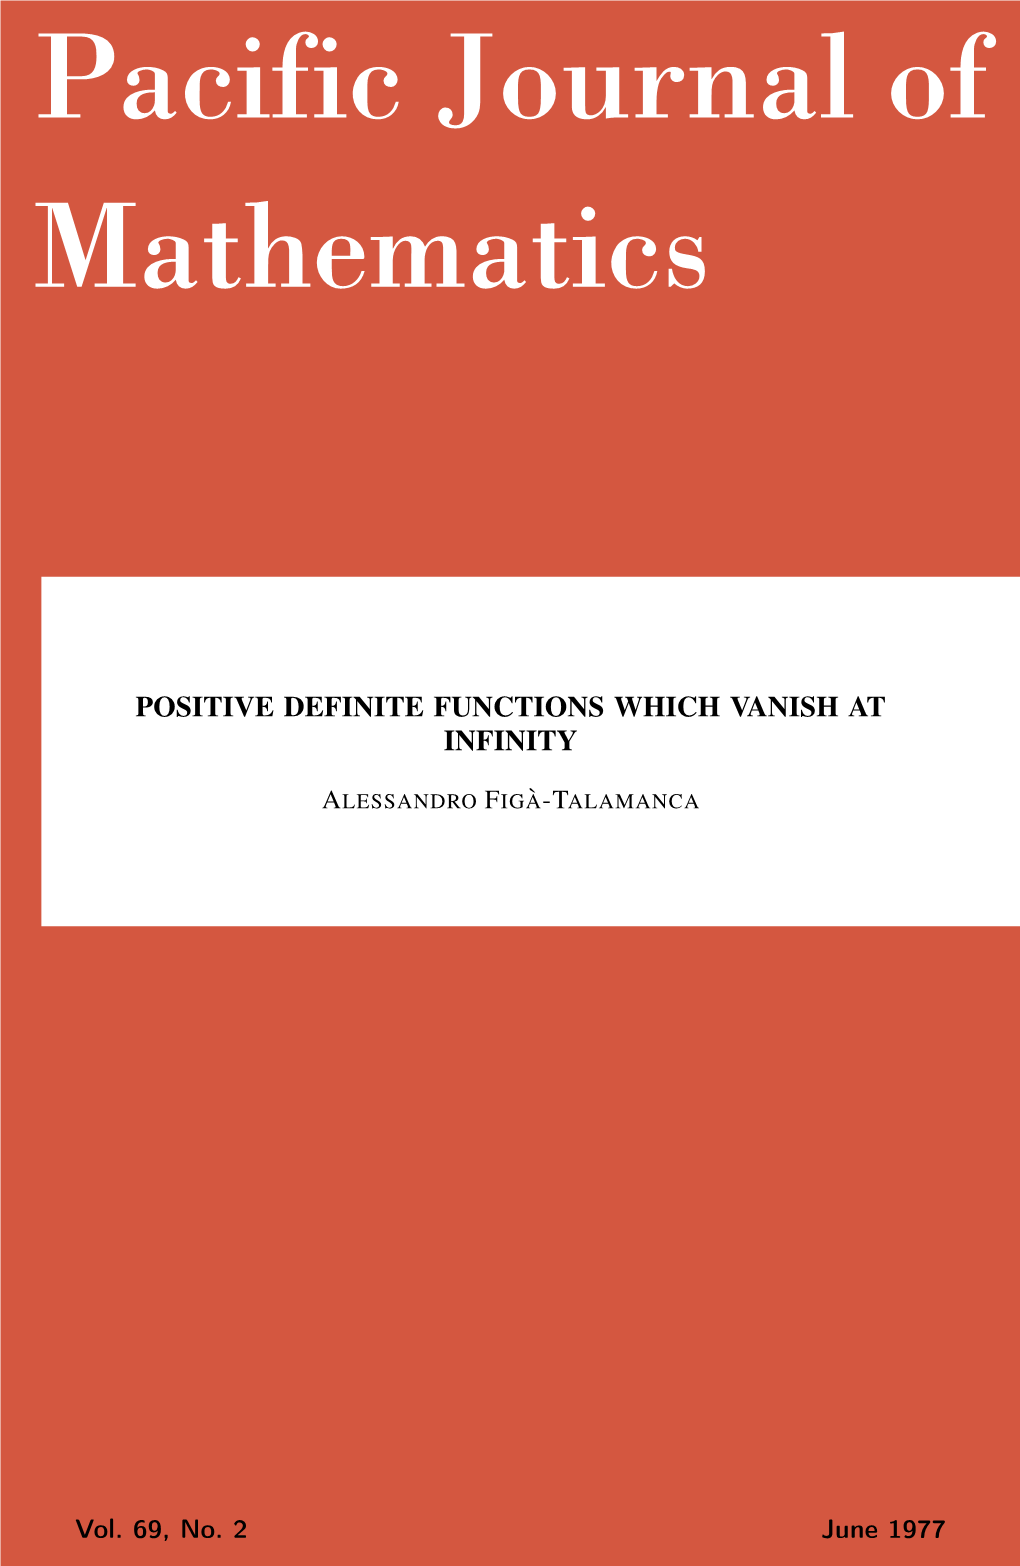 Positive Definite Functions Which Vanish at Infinity